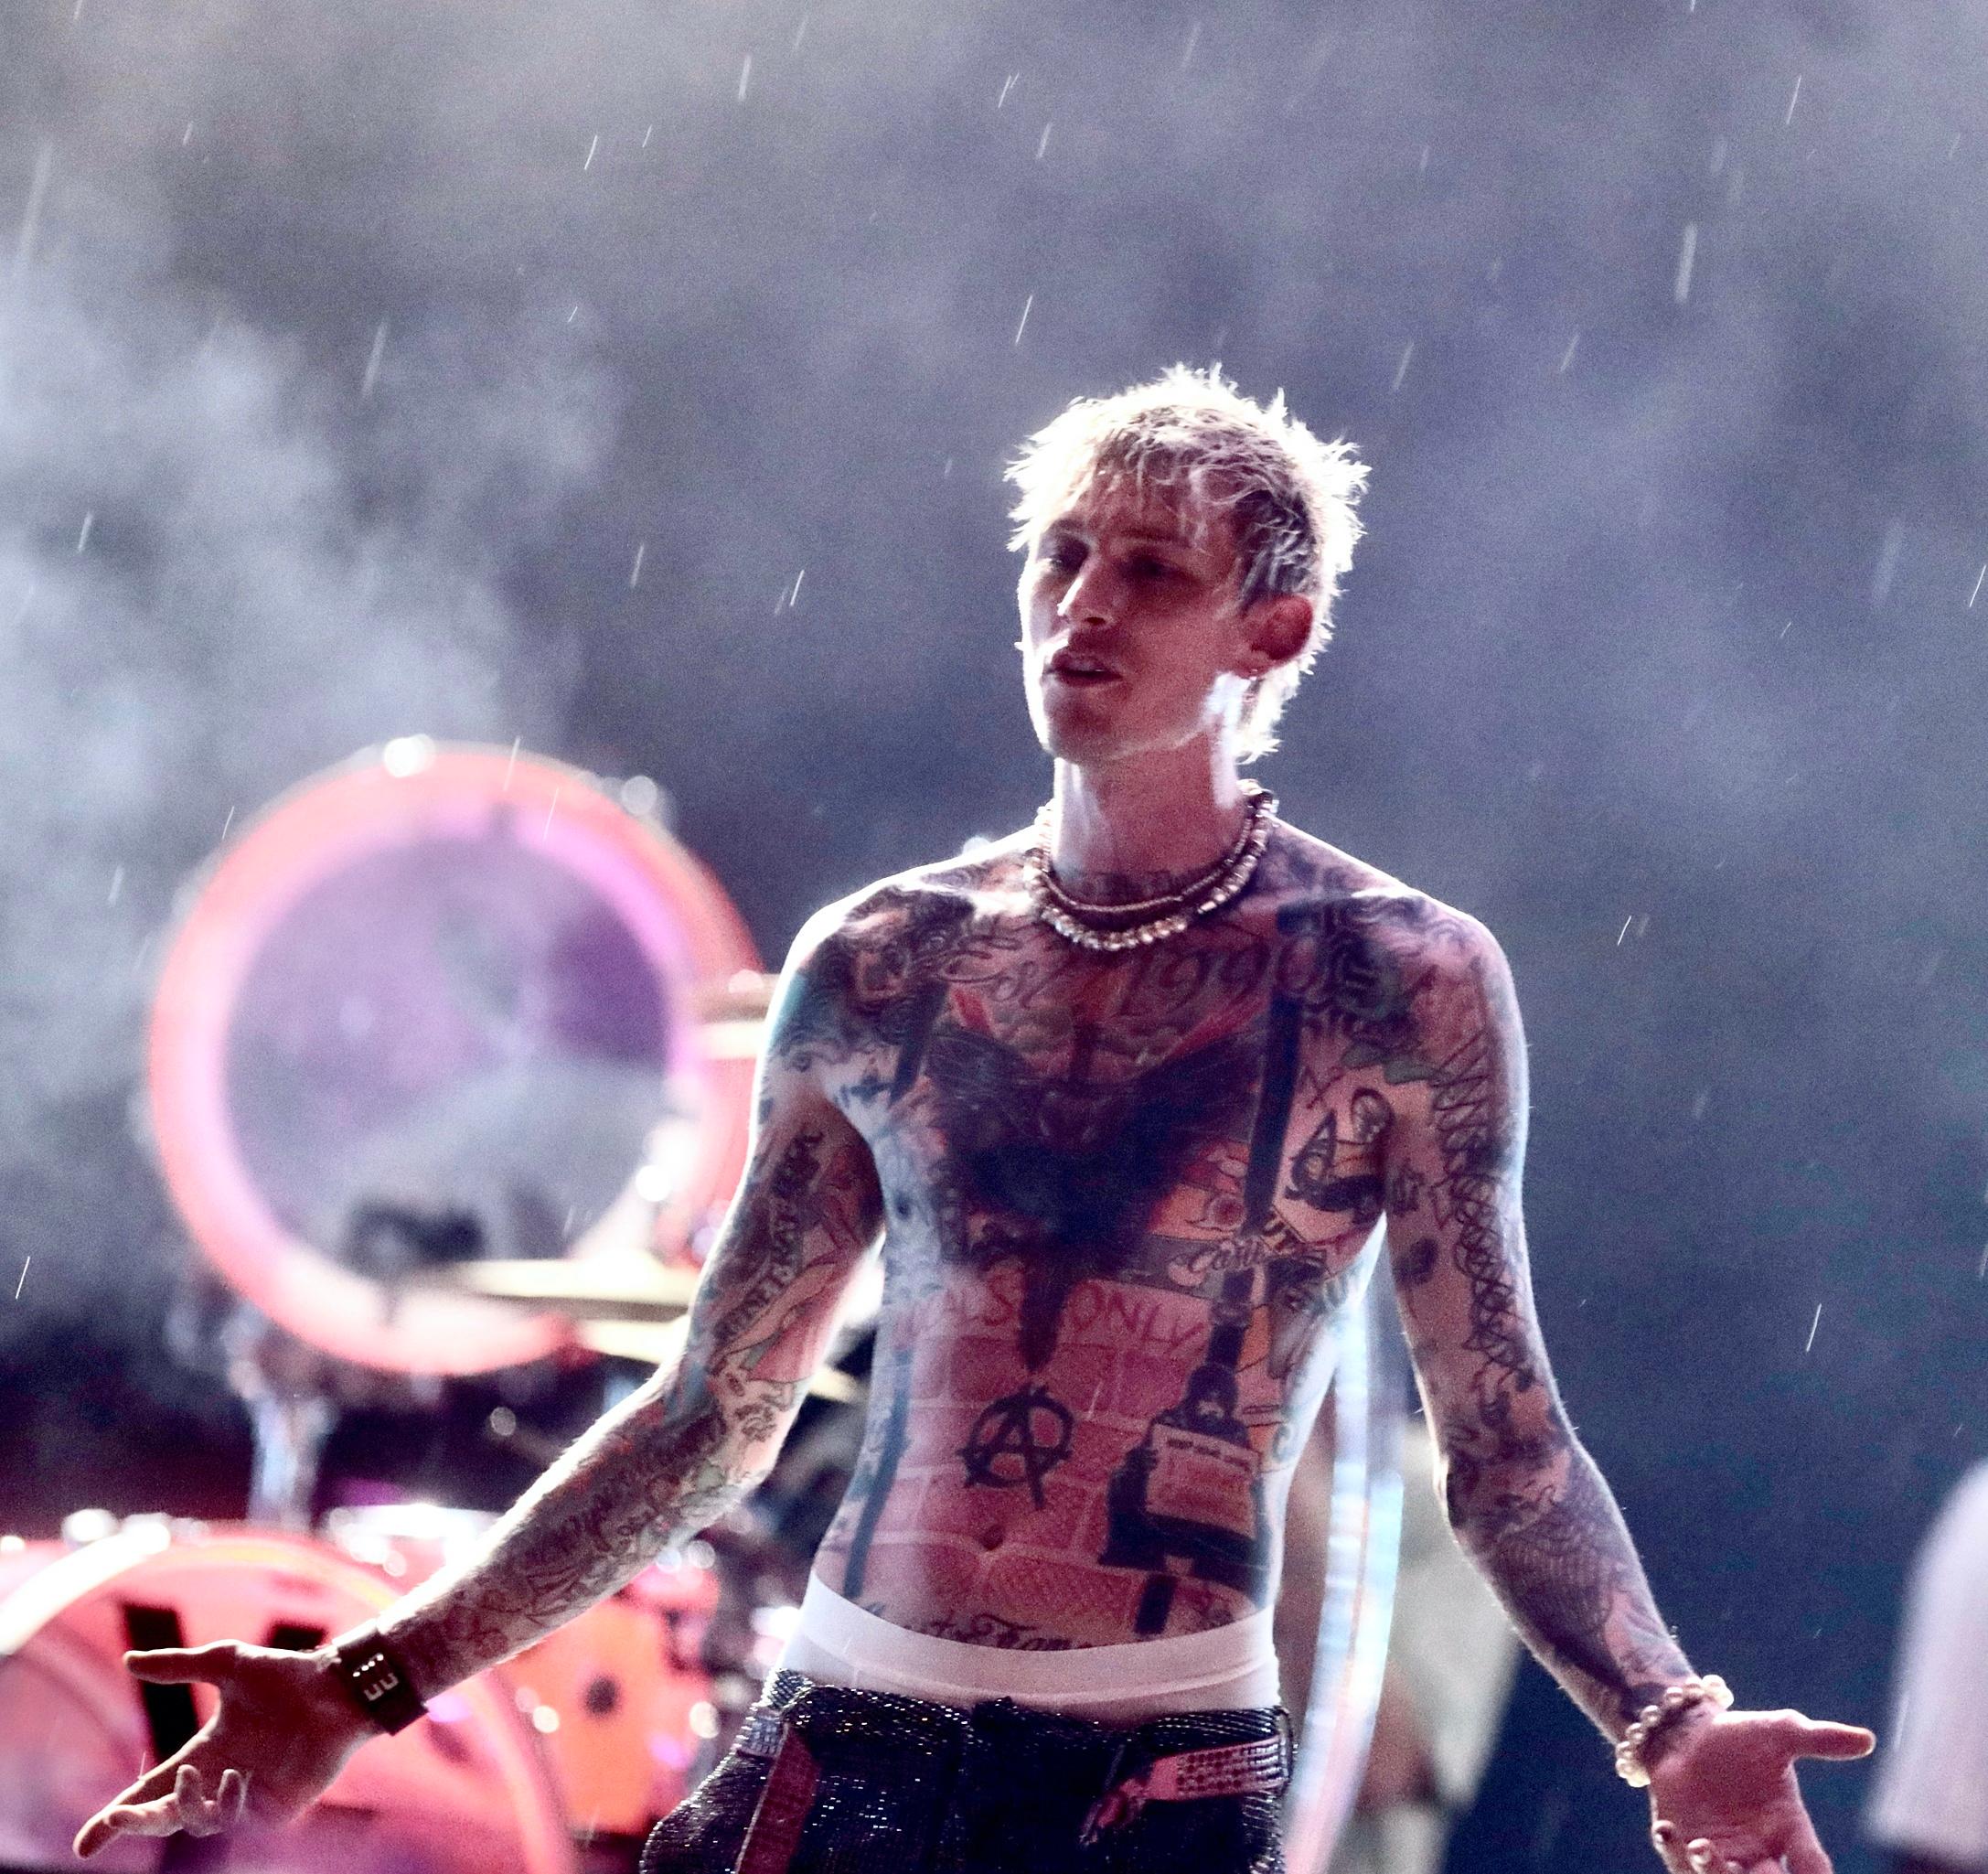 Machine Gun Kelly Tries to continue his Summer stage Central Park concert despite the officials turning off the sound system because of an approaching thunderstorm.